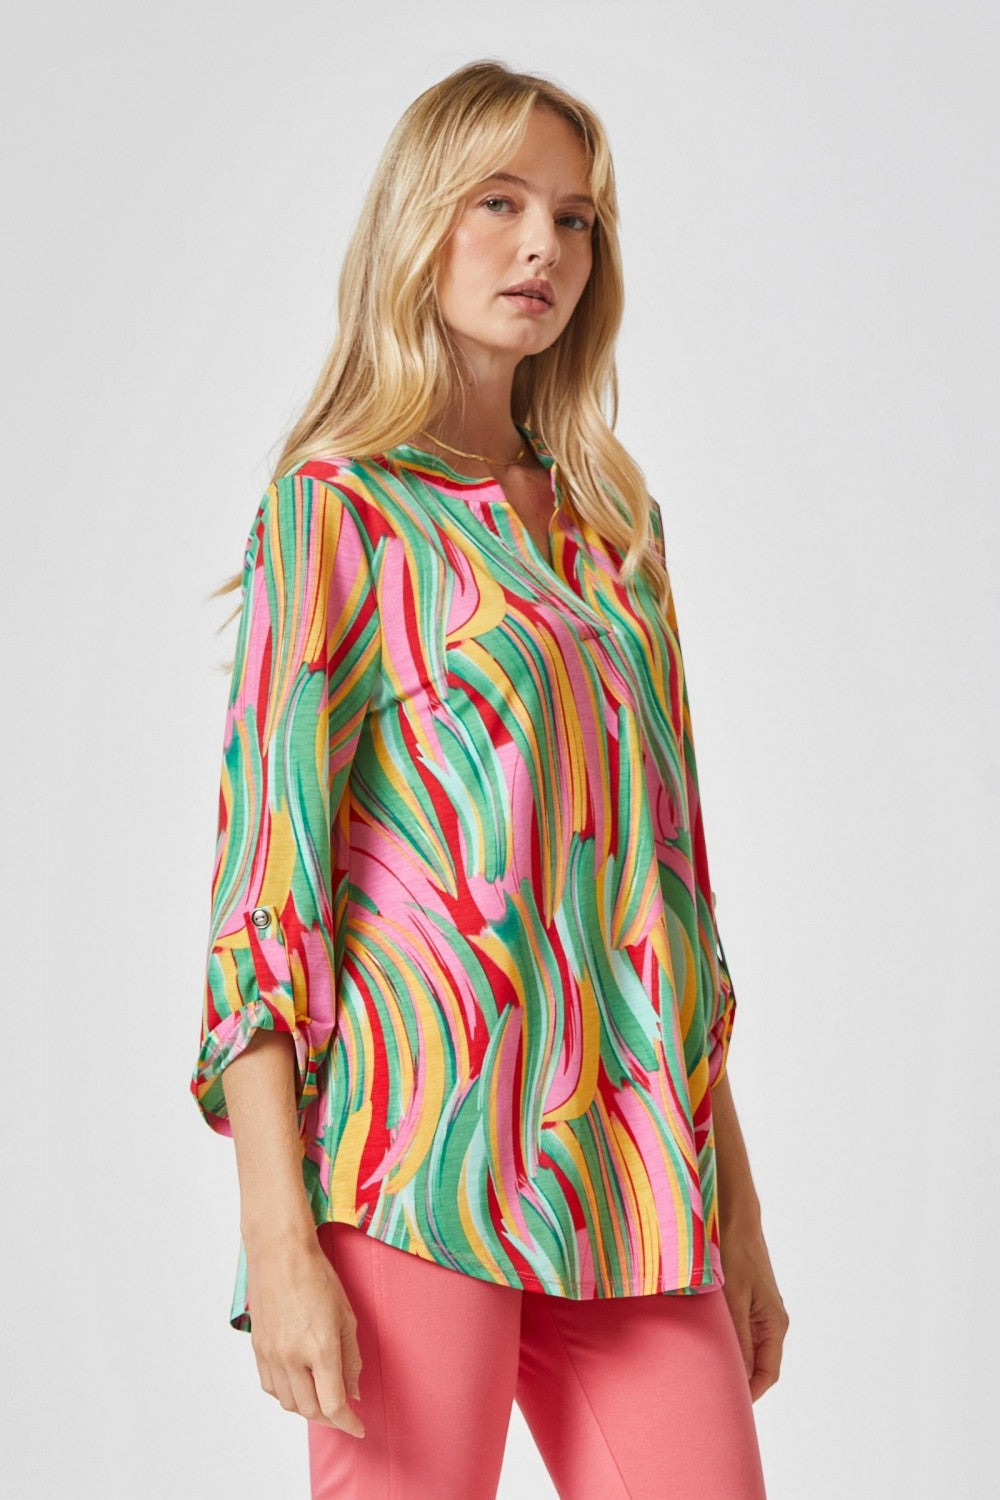 Vertical Splash Colorful Lizzy Top